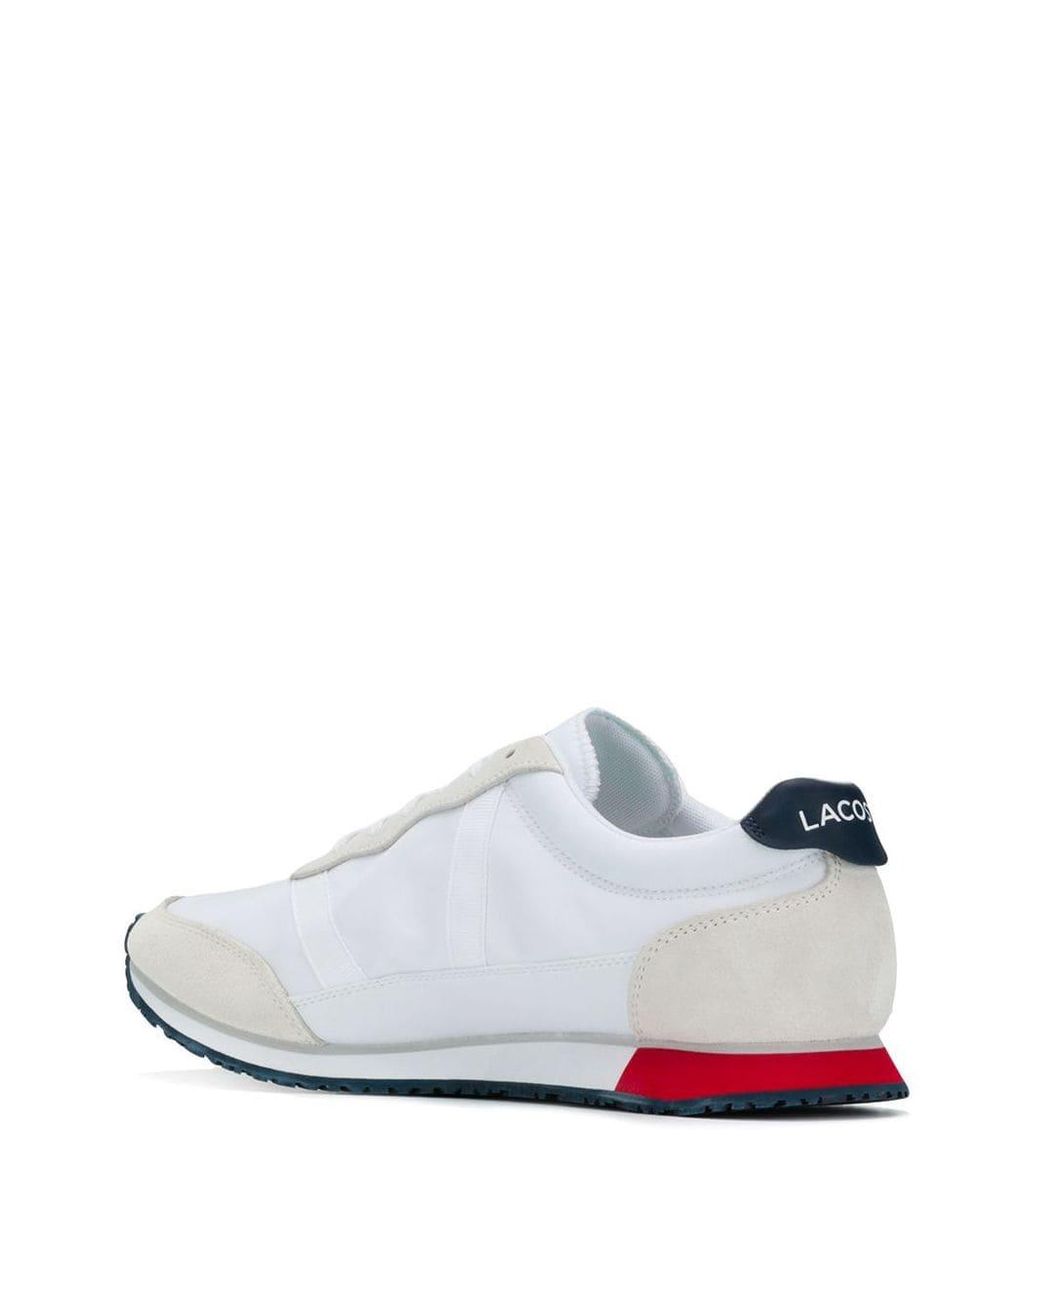 Lacoste Suede Partner Sneakers in White 